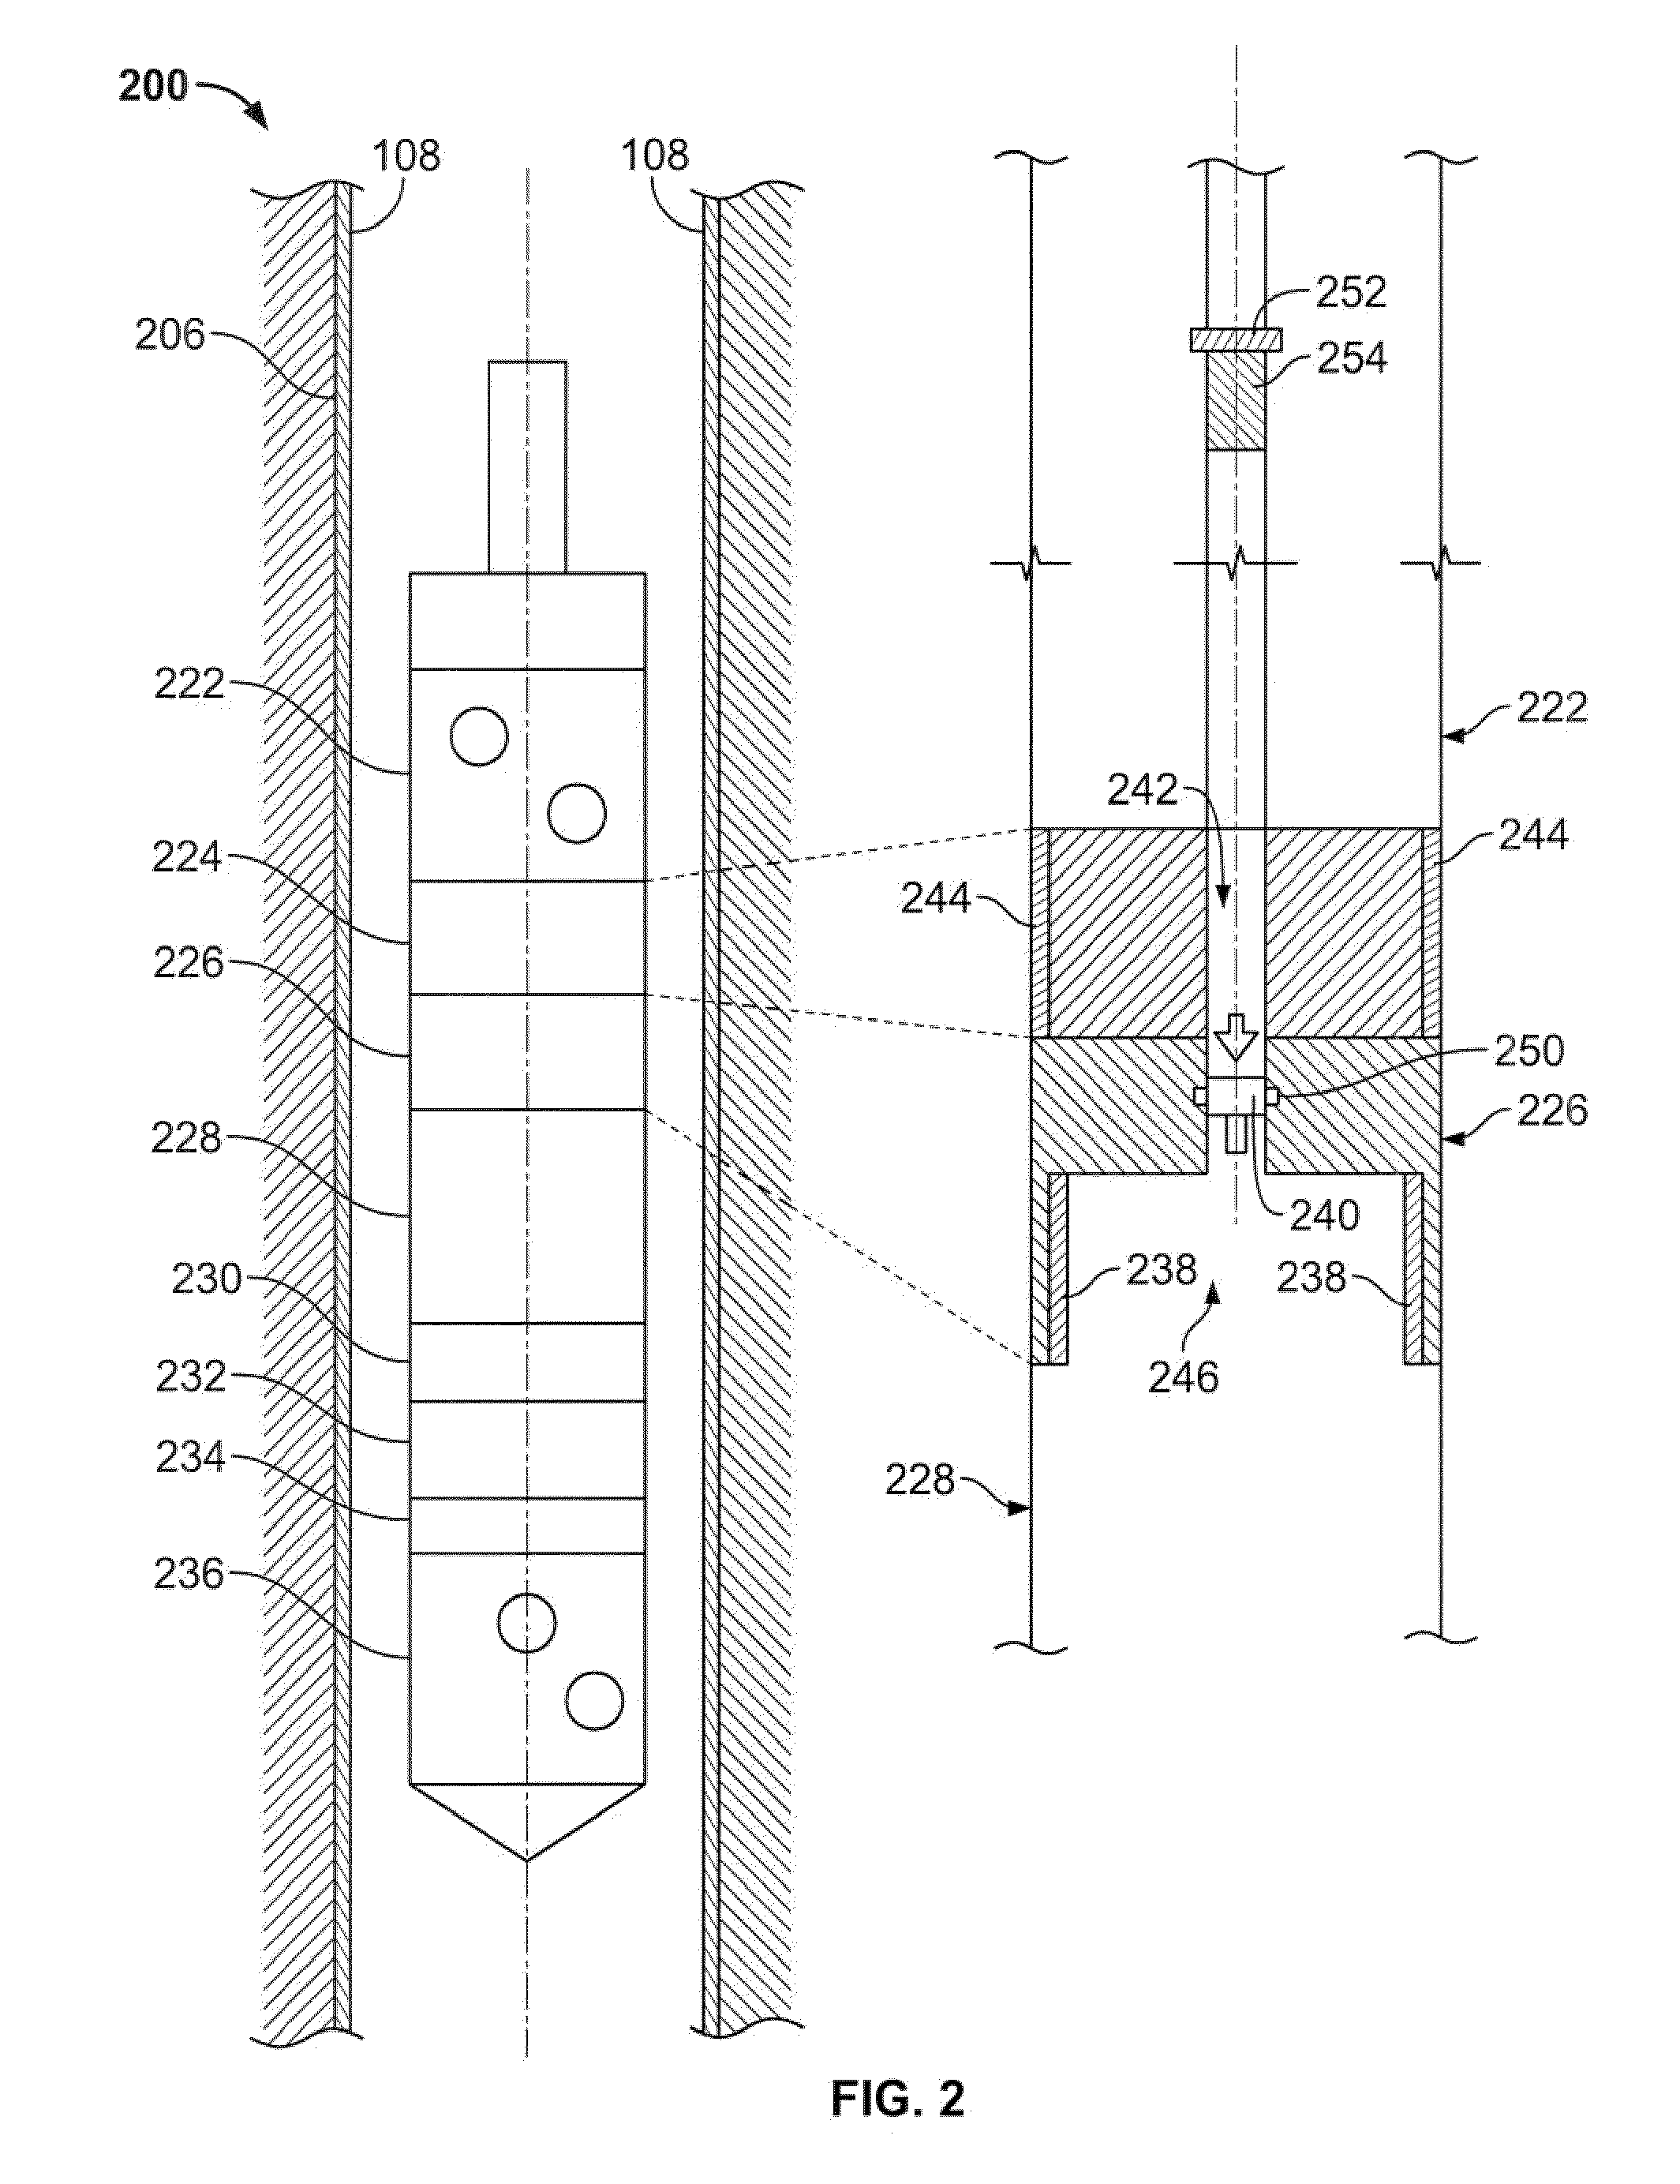 Managing Pressurized Fluid in a Downhole Tool